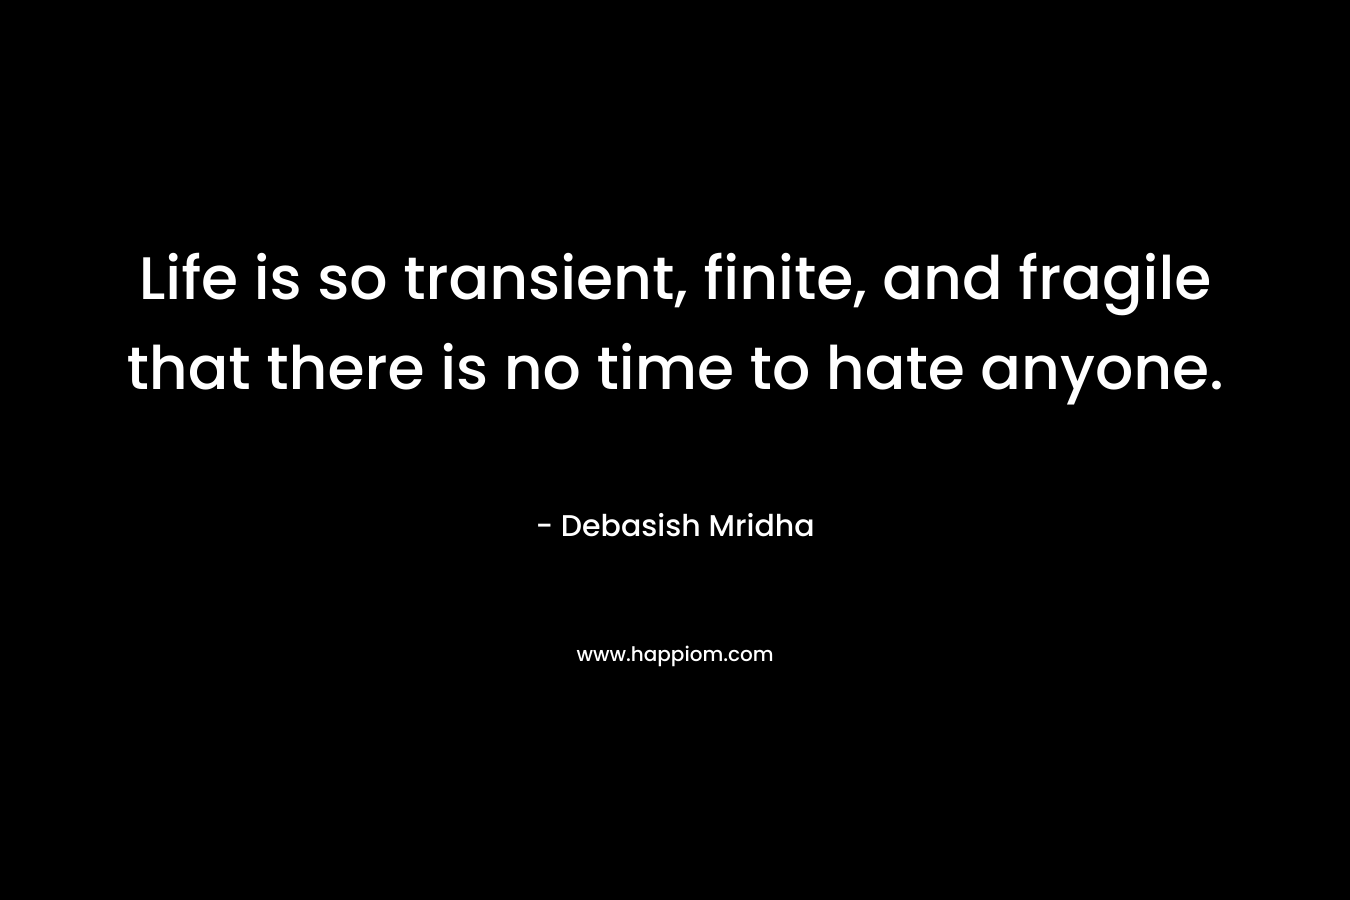 Life is so transient, finite, and fragile that there is no time to hate anyone. – Debasish Mridha